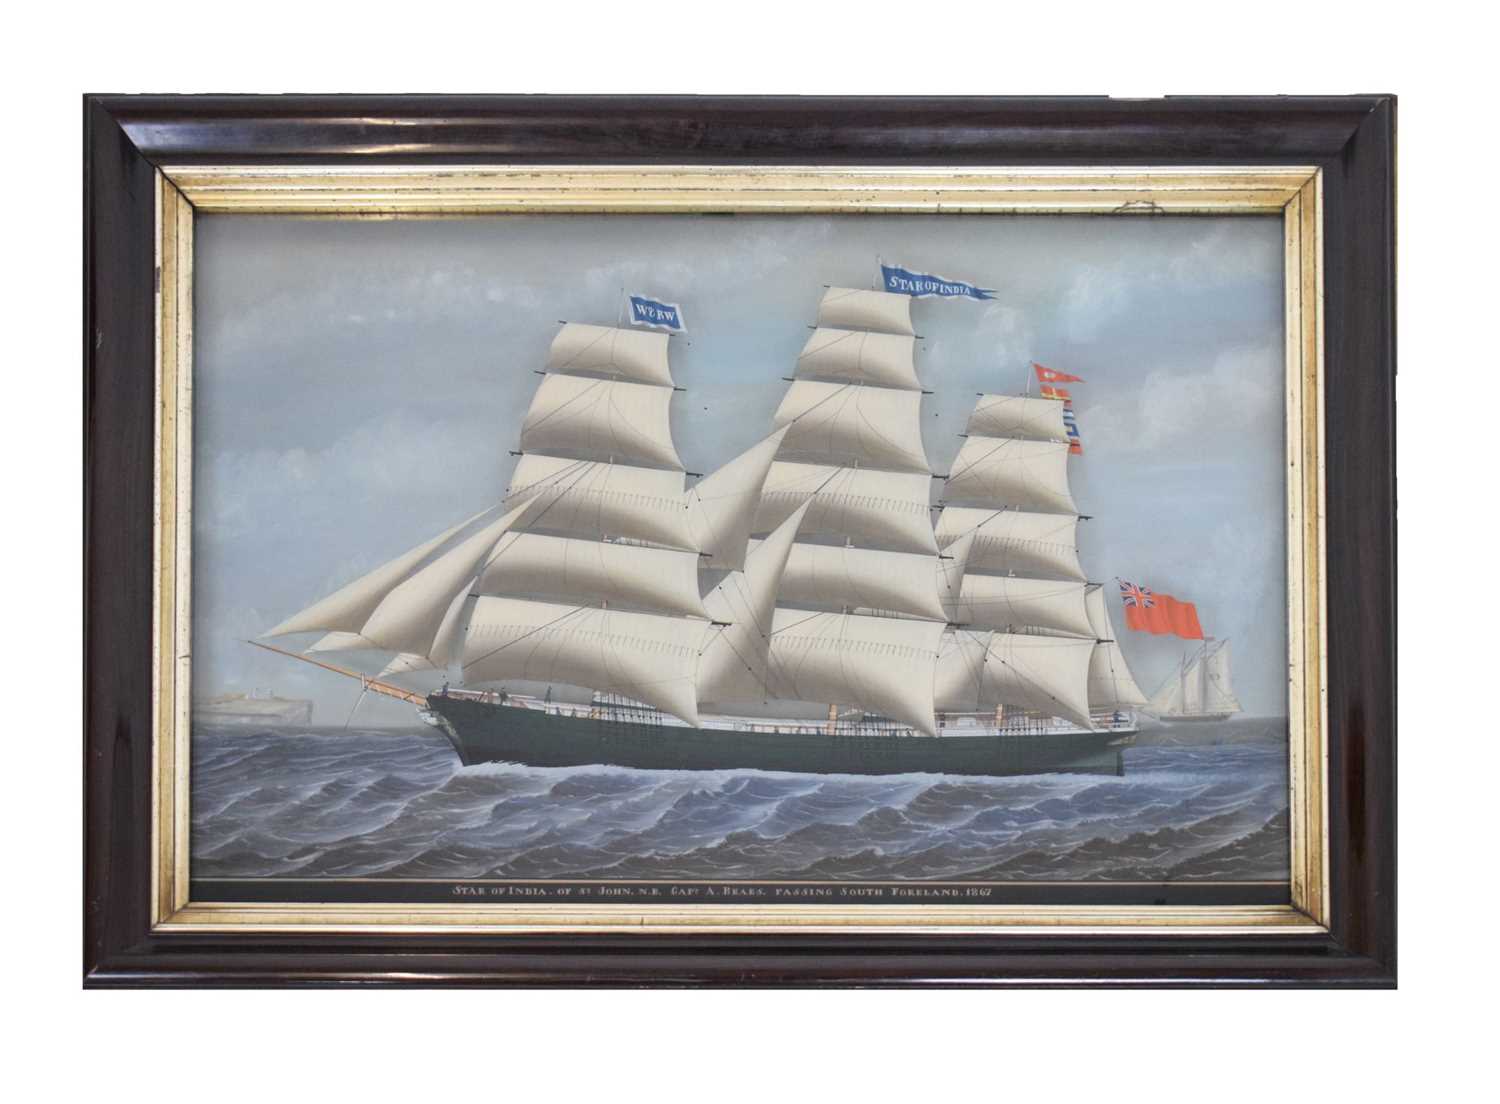 Lot 432 - Attributed to Carolus Ludovicus Weyts (Belgian, 1828-1875) - 'The Star of India'